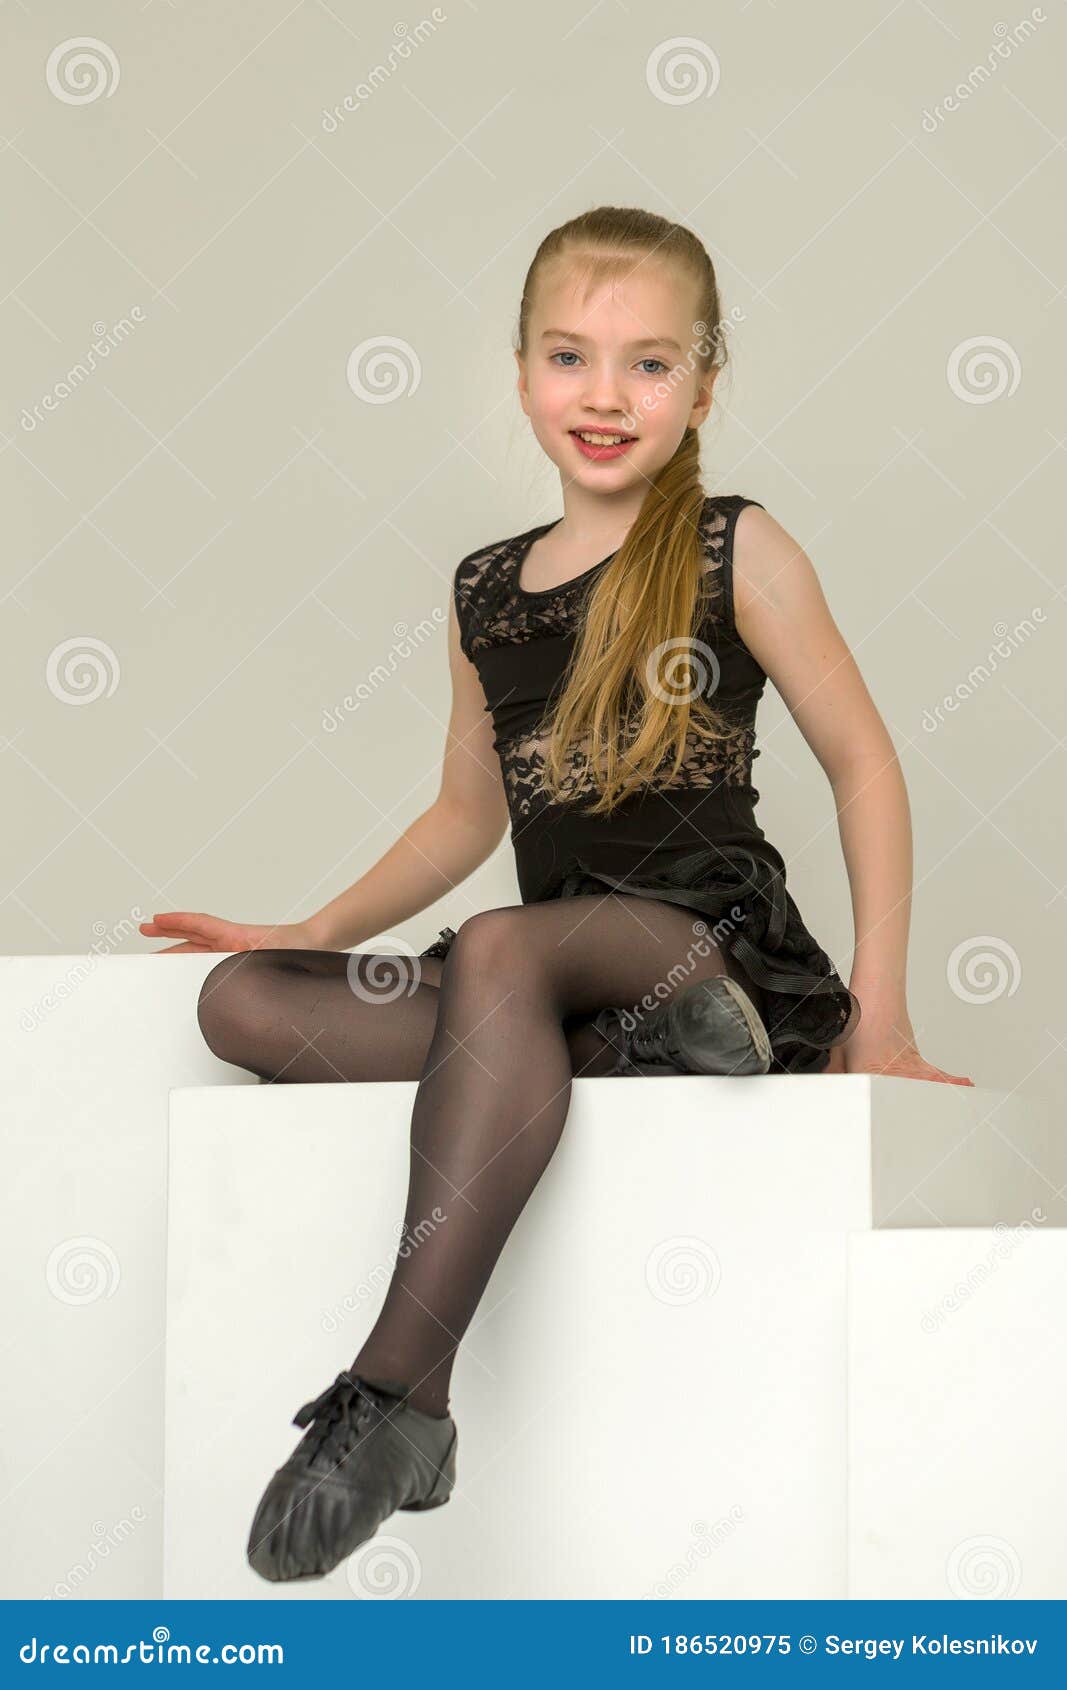 ls models preteen child little girl Sweet Little Girl stock photo. Image of disappointed, child ...